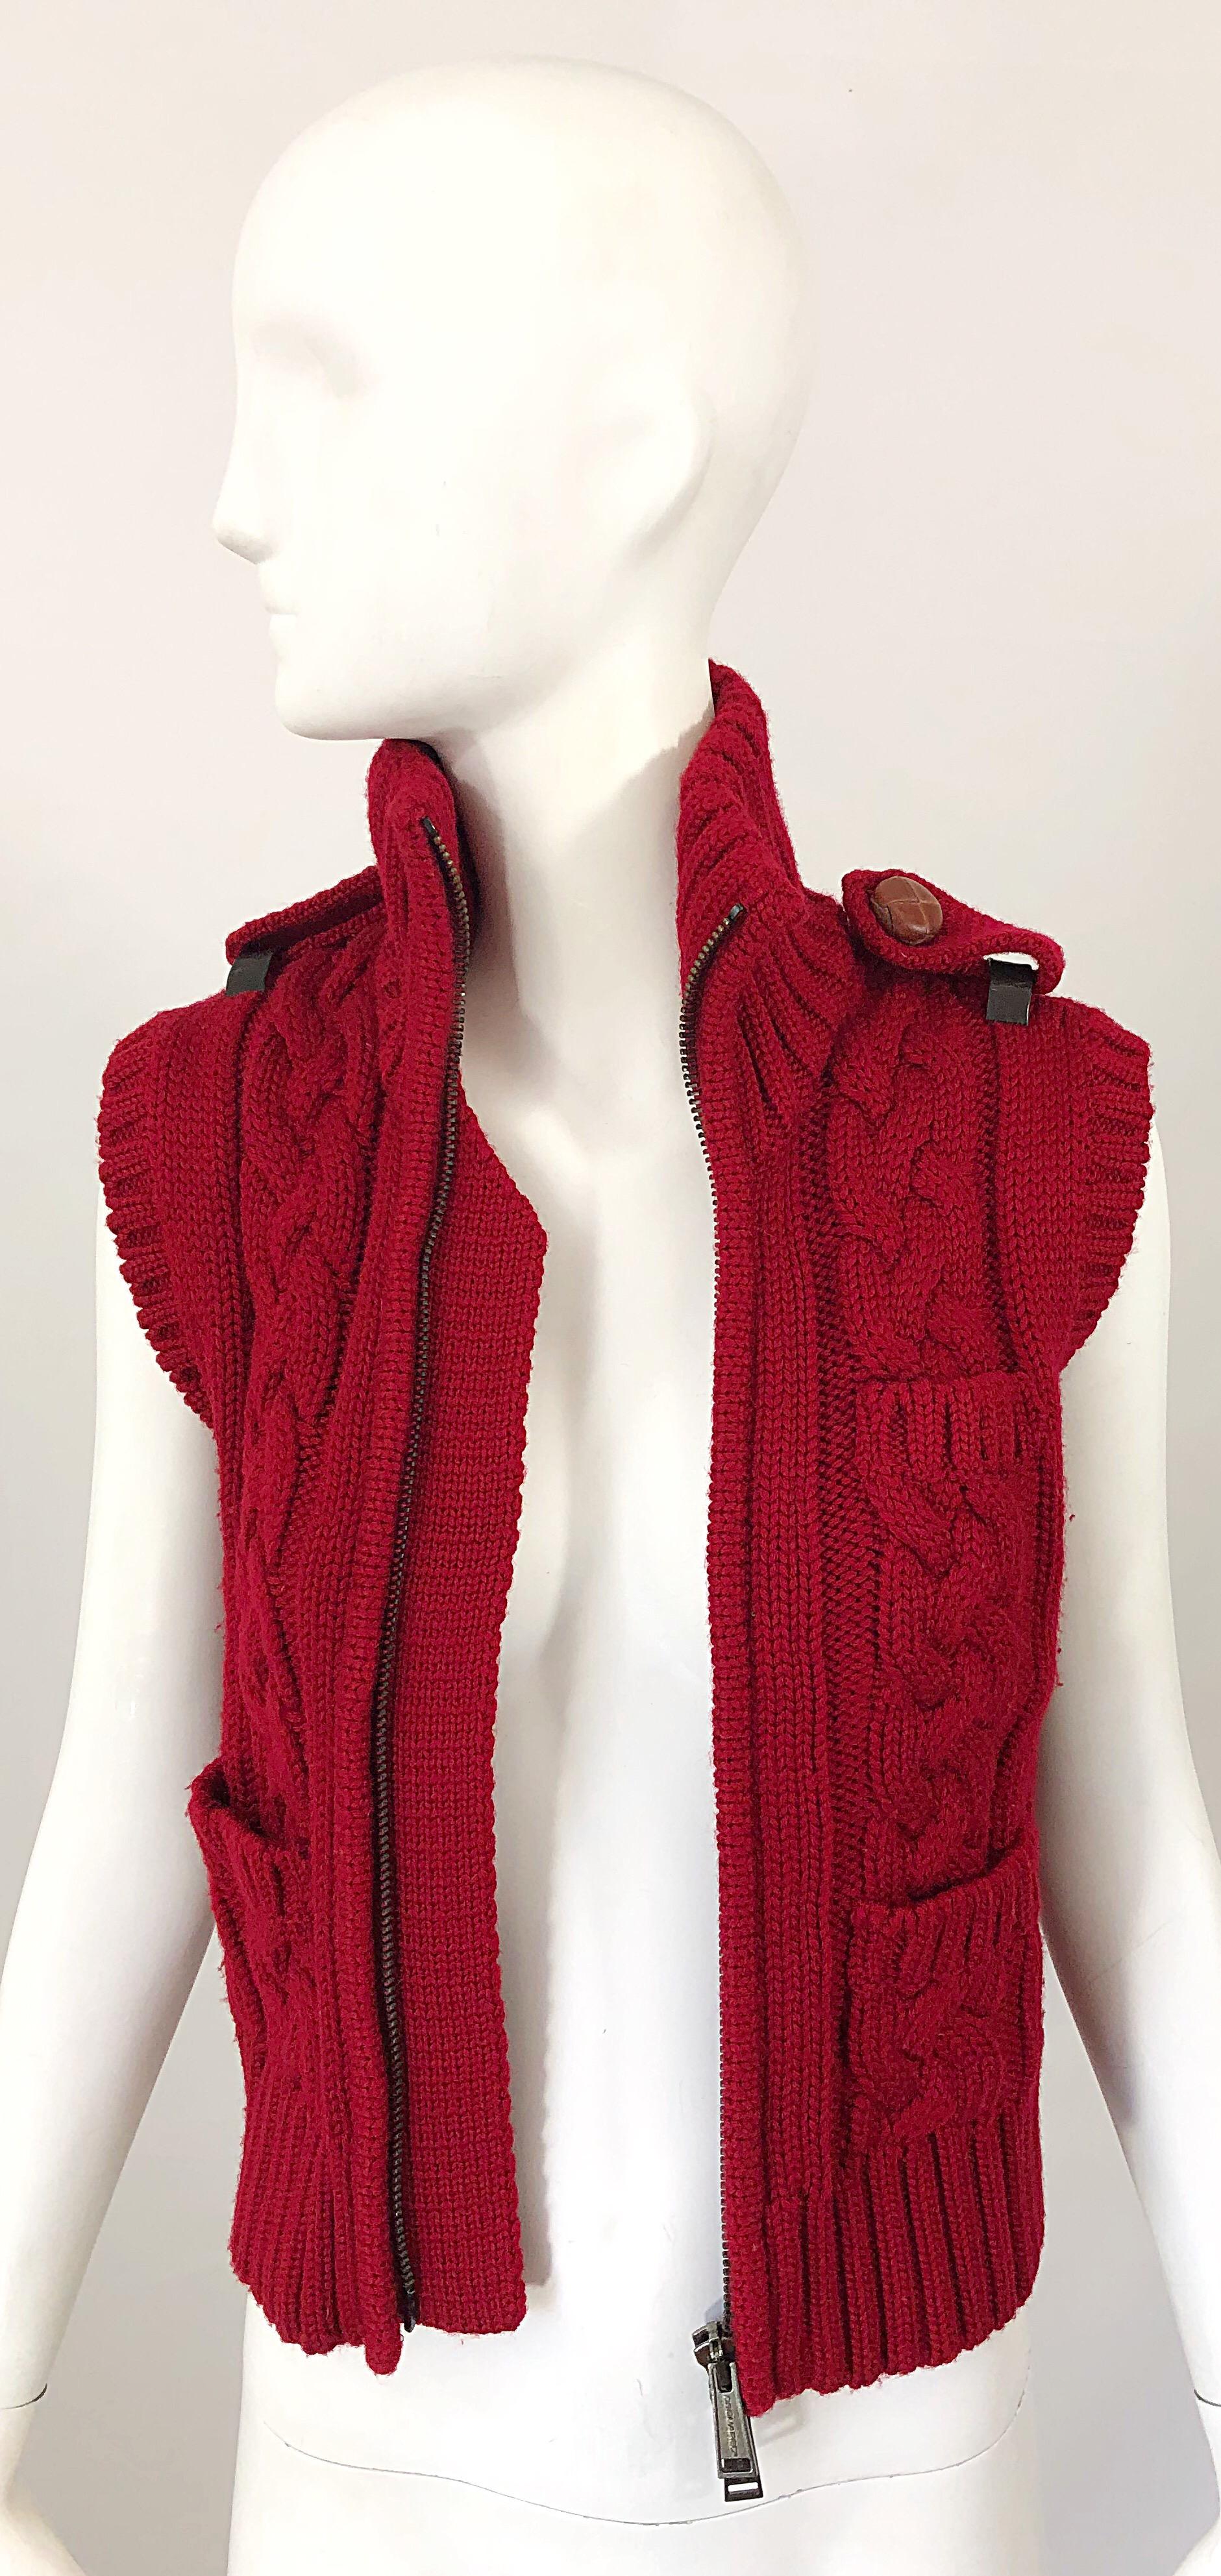 DSquared2 Early 2000s Lipstick Red Wool Sleeveless Cardigan Sweater Vest Top For Sale 1